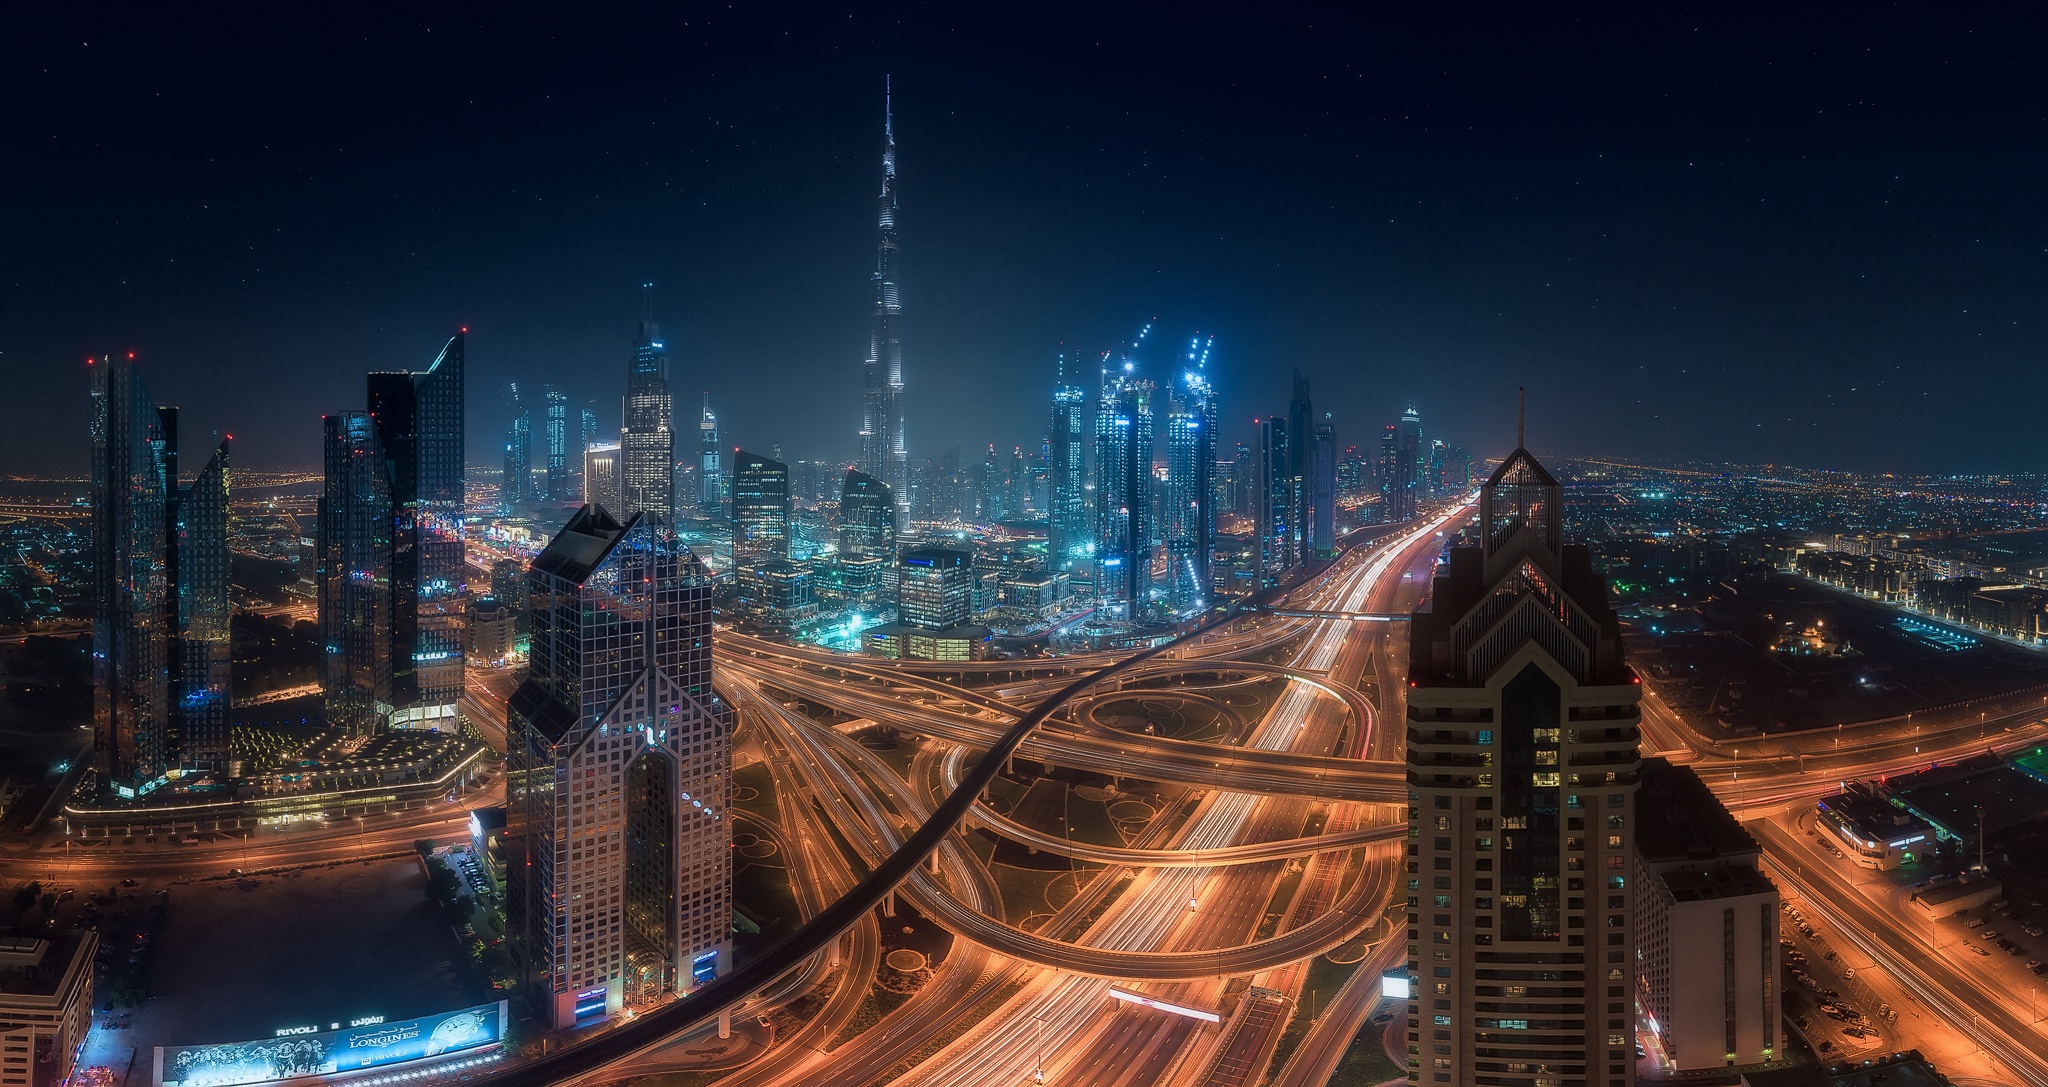 Download mobile wallpaper Cities, Night, City, Skyscraper, Building, Light, Dubai, United Arab Emirates, Highway, Man Made for free.